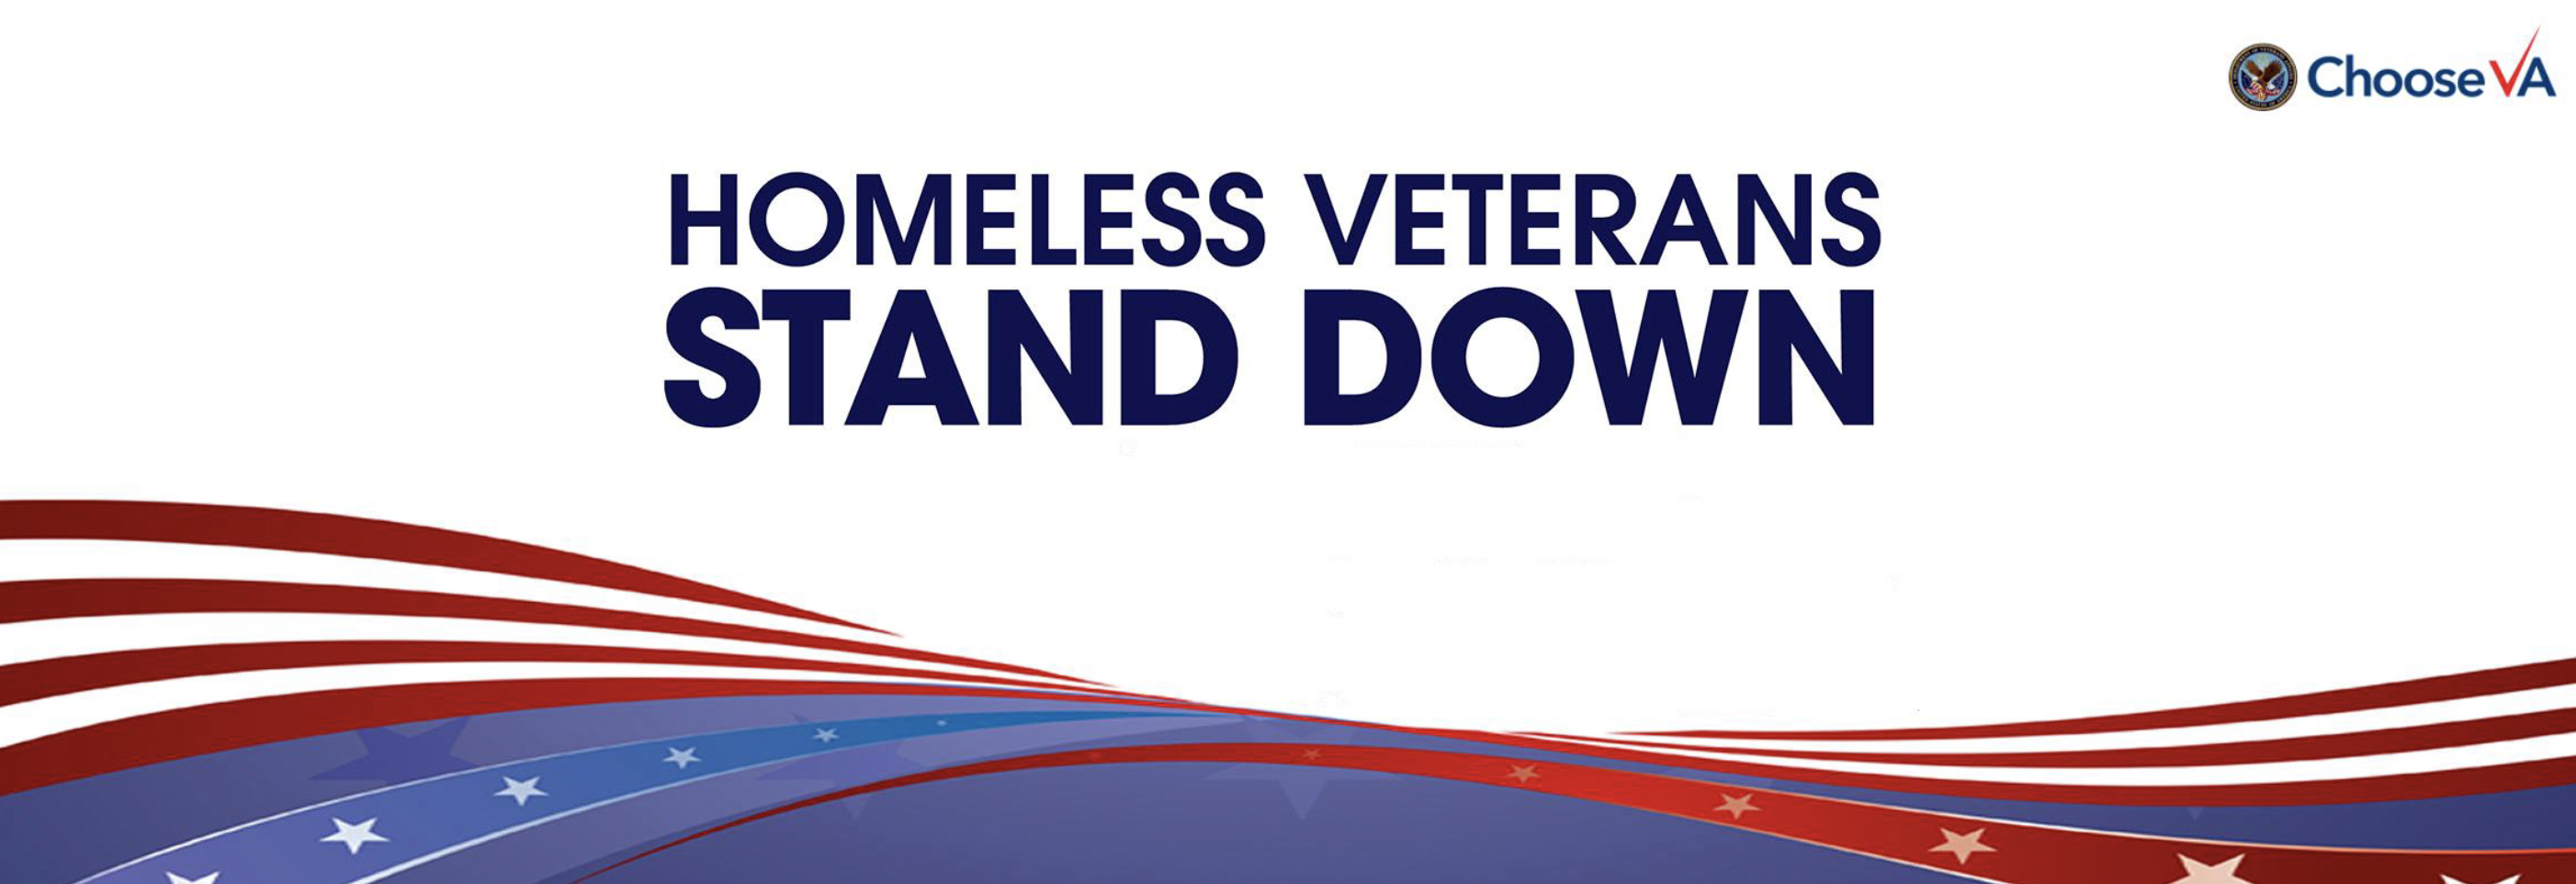 Homeless Veterans Stand Down Event 2018